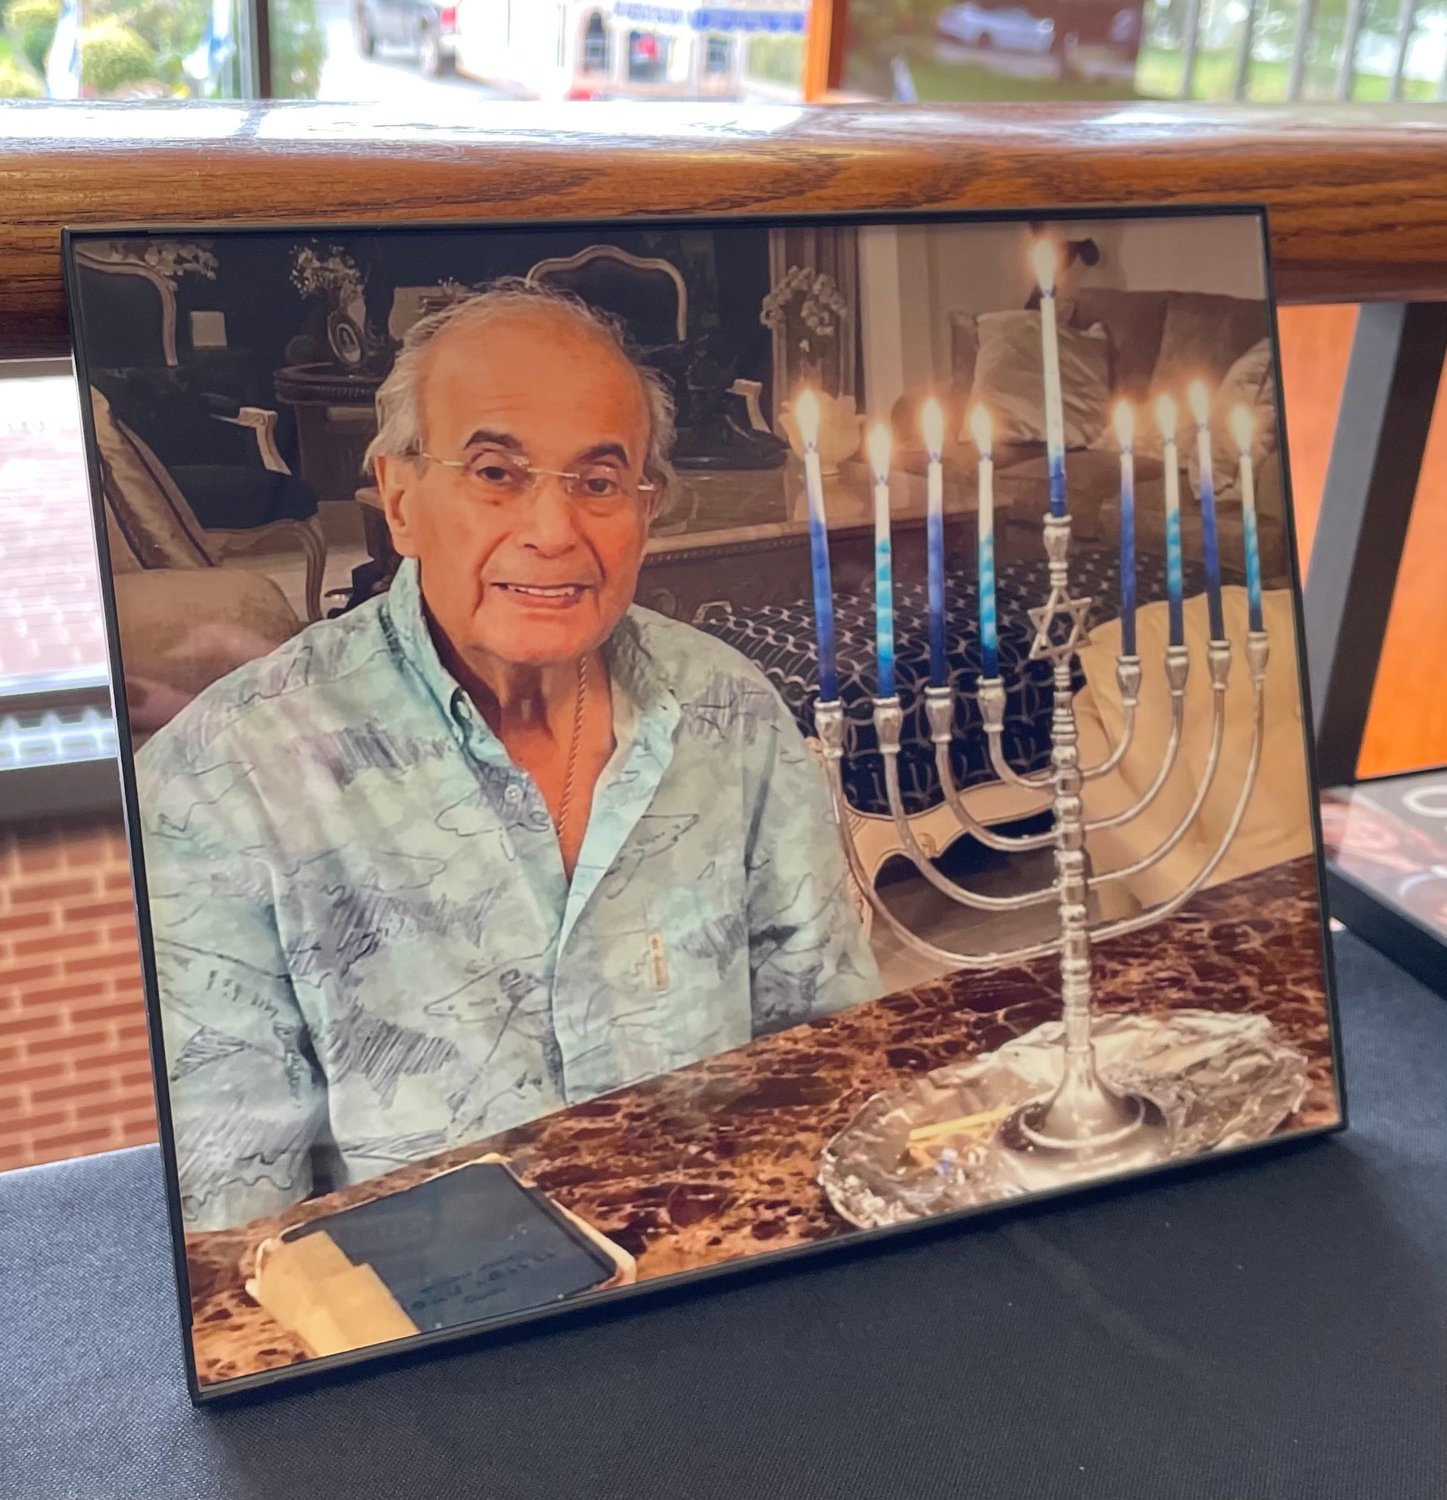 Adwar, a longtime Merrick resident and congregation member, died last year. His family sponsored the new Torah in his honor.